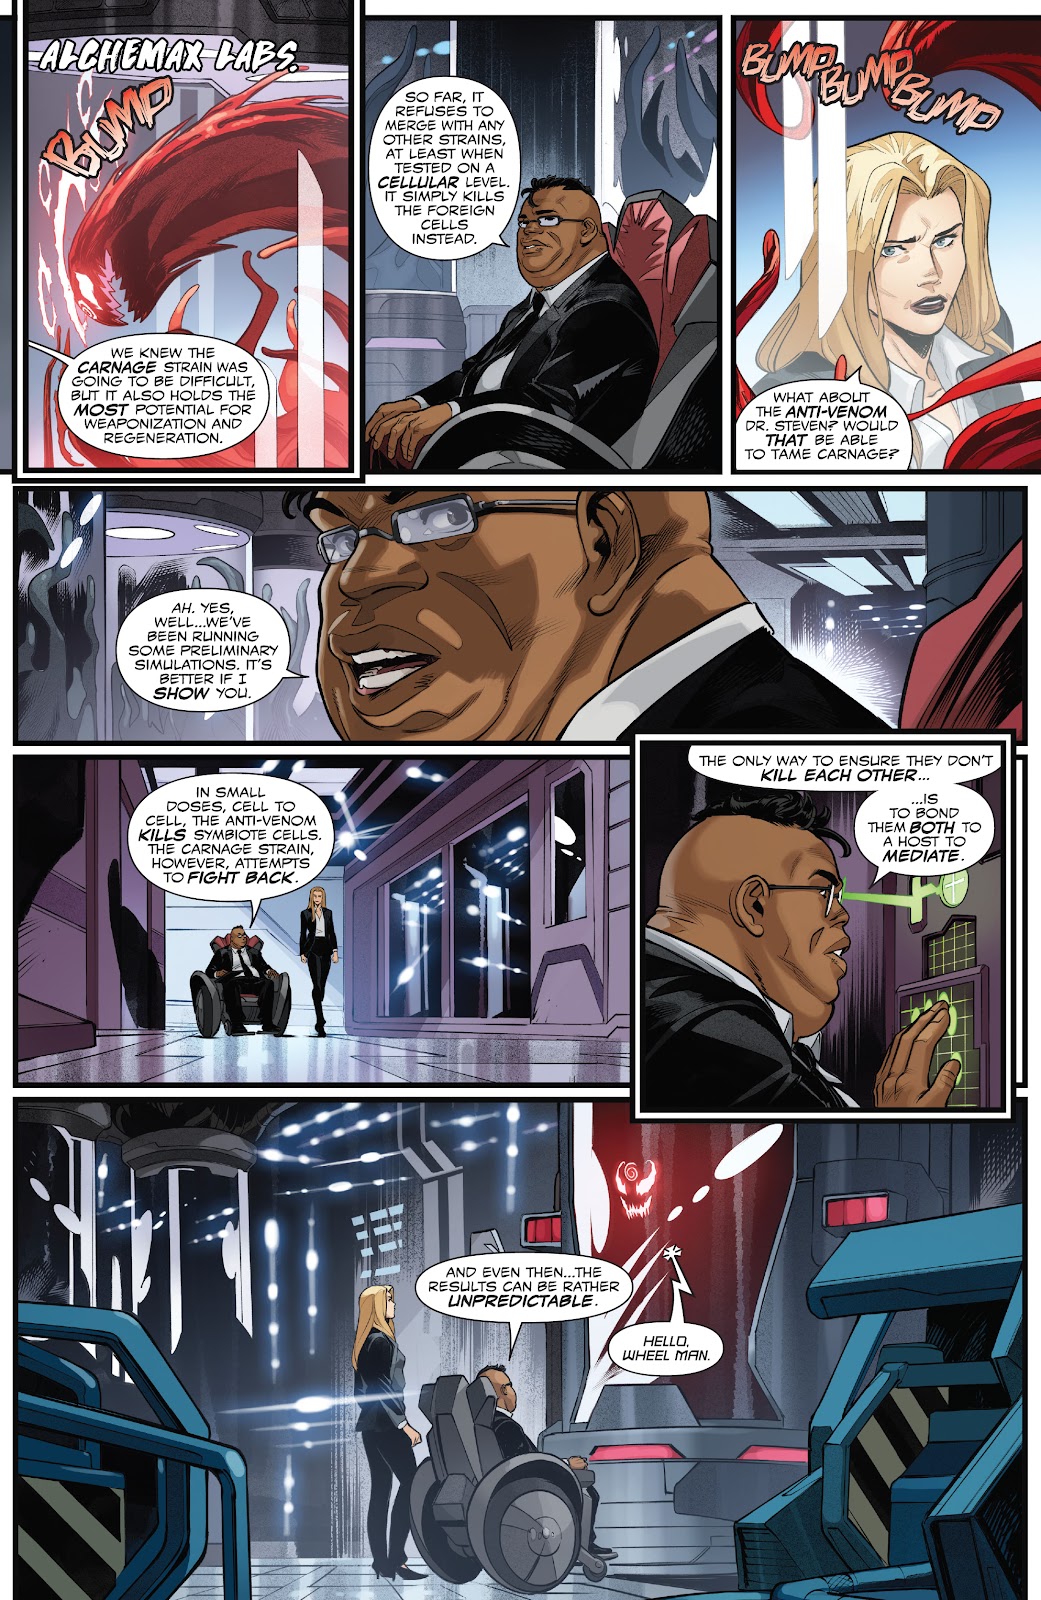 Cult of Carnage: Misery issue 1 - Page 12